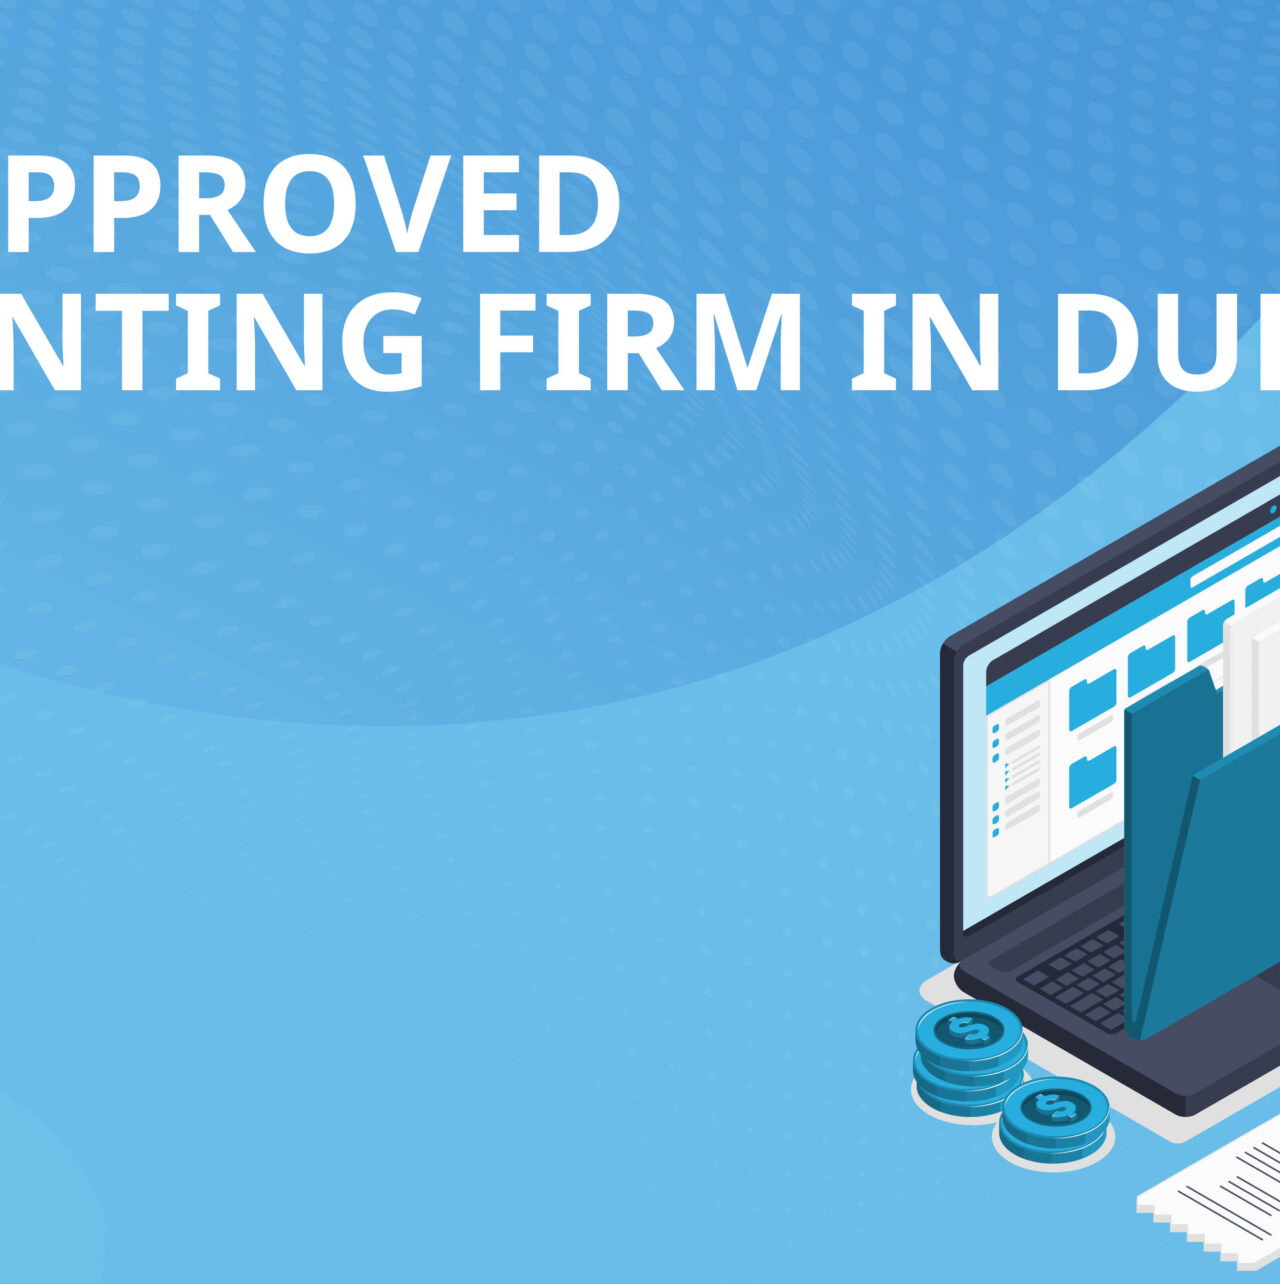 ACCA Approved Accounting Firm In Dubai